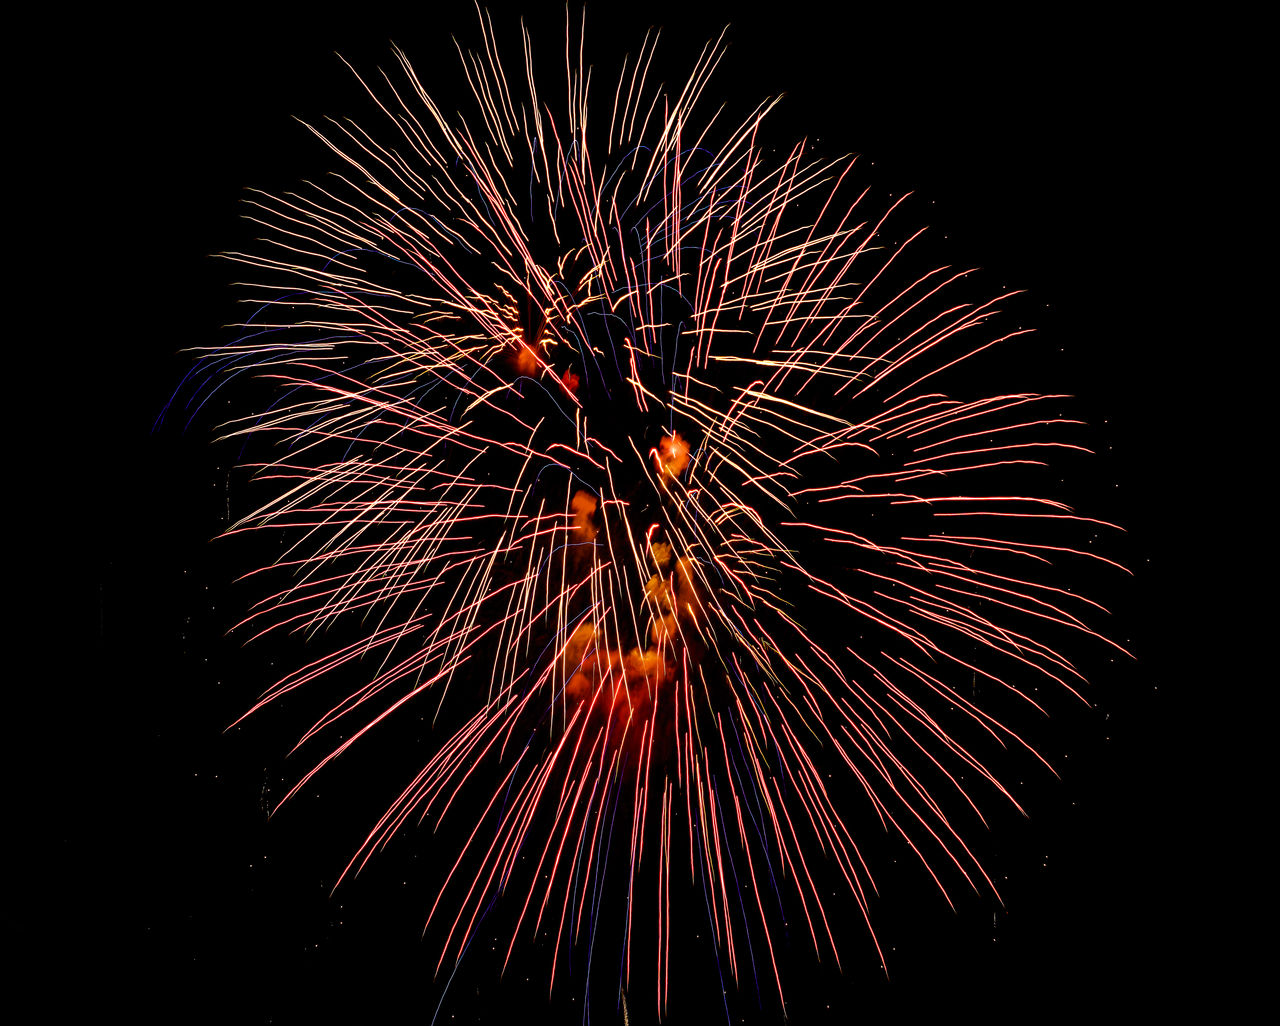 fireworks, night, celebration, motion, event, firework display, exploding, illuminated, arts culture and entertainment, sky, no people, nature, glowing, recreation, low angle view, firework - man made object, long exposure, multi colored, blurred motion, outdoors, dark, black, burning, new year's eve, midnight